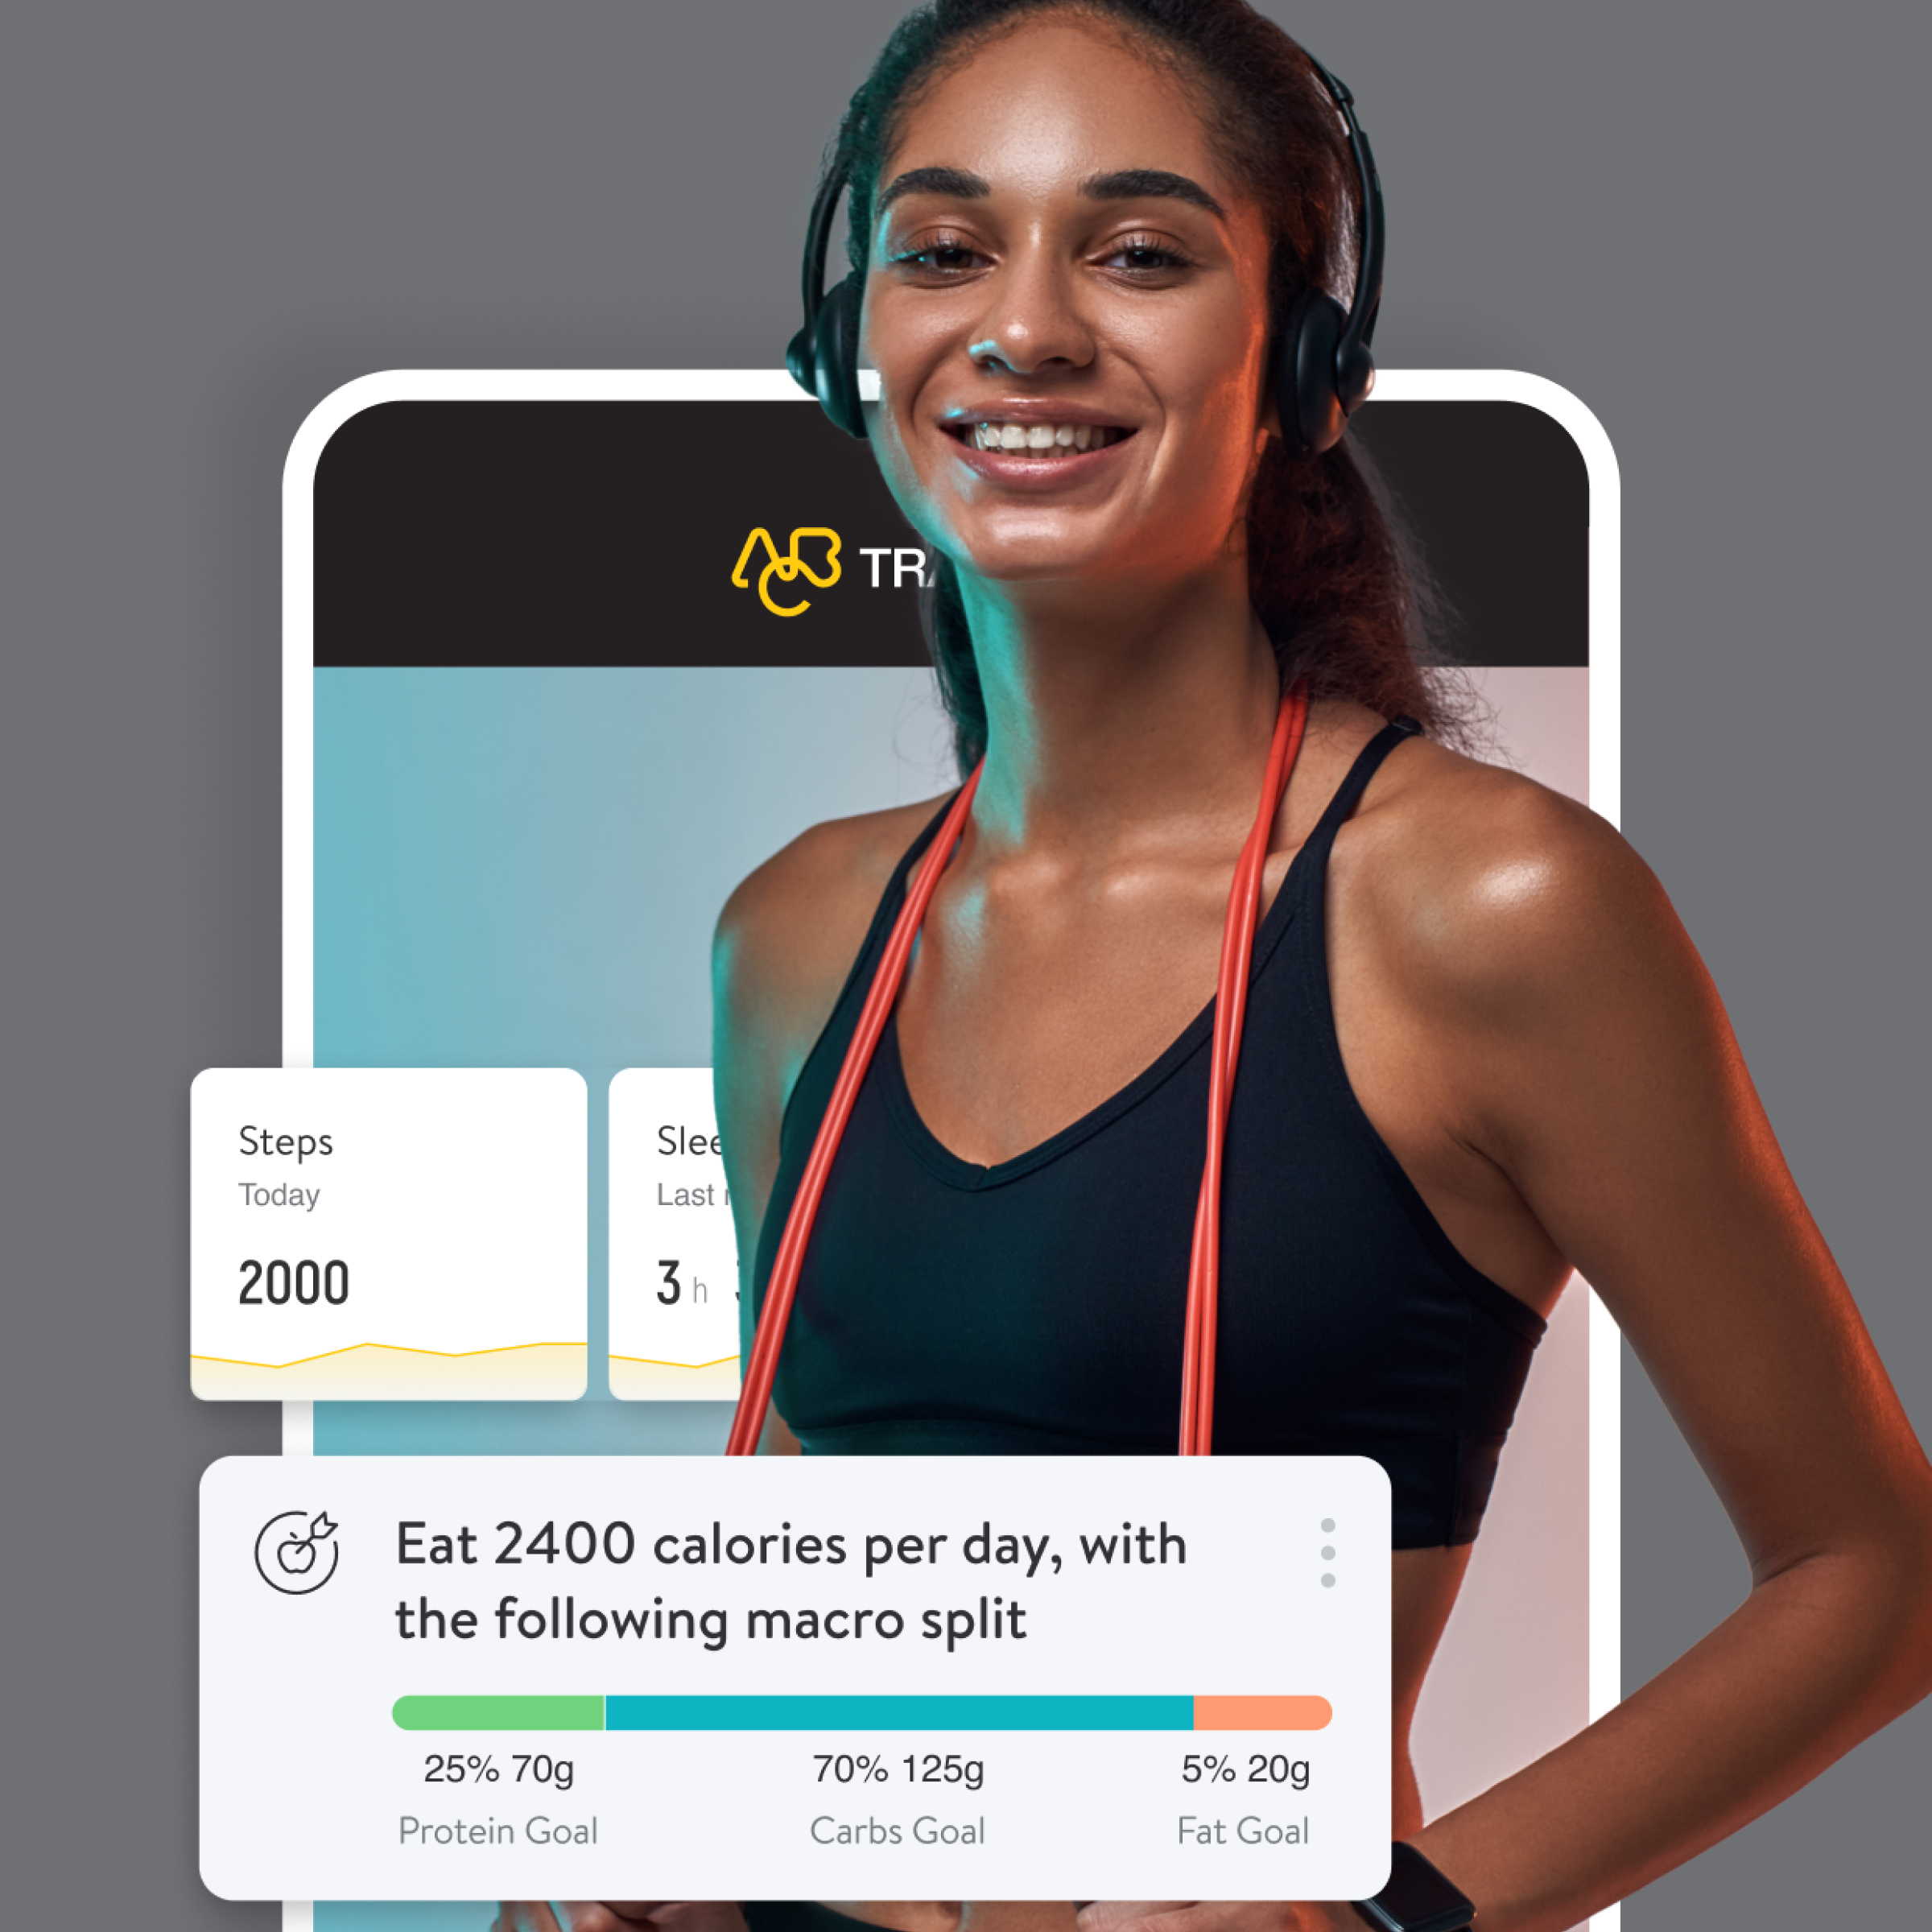 Enhance your clients' experience with client engagement tools. Boost your PT profits by giving your clients' more options to train with you. Deliver your fitness and nutrition programs on your own PT coaching app